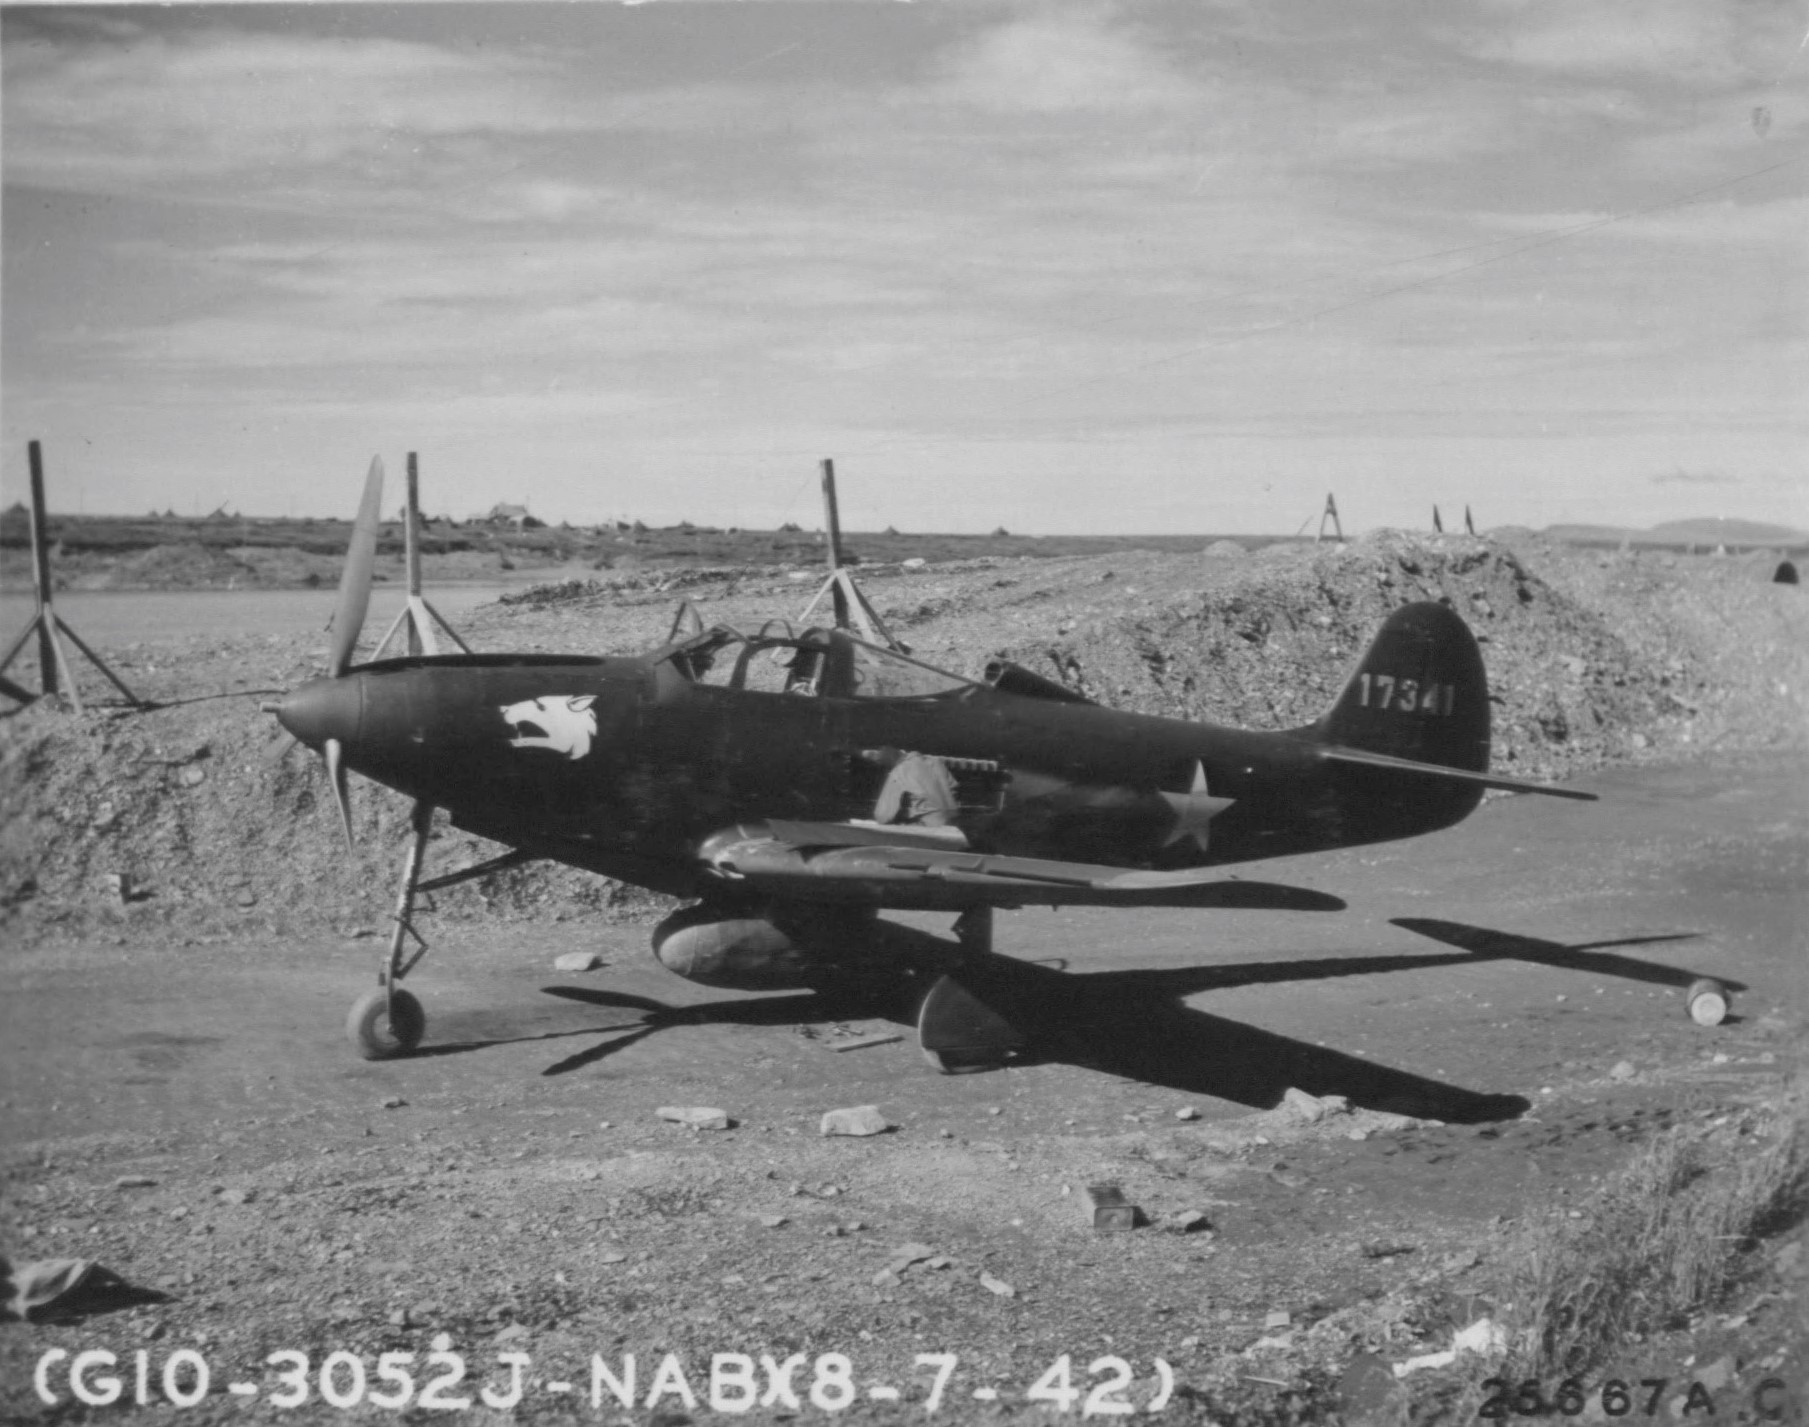 Bell P-39 in parking area, with alert crew on duty